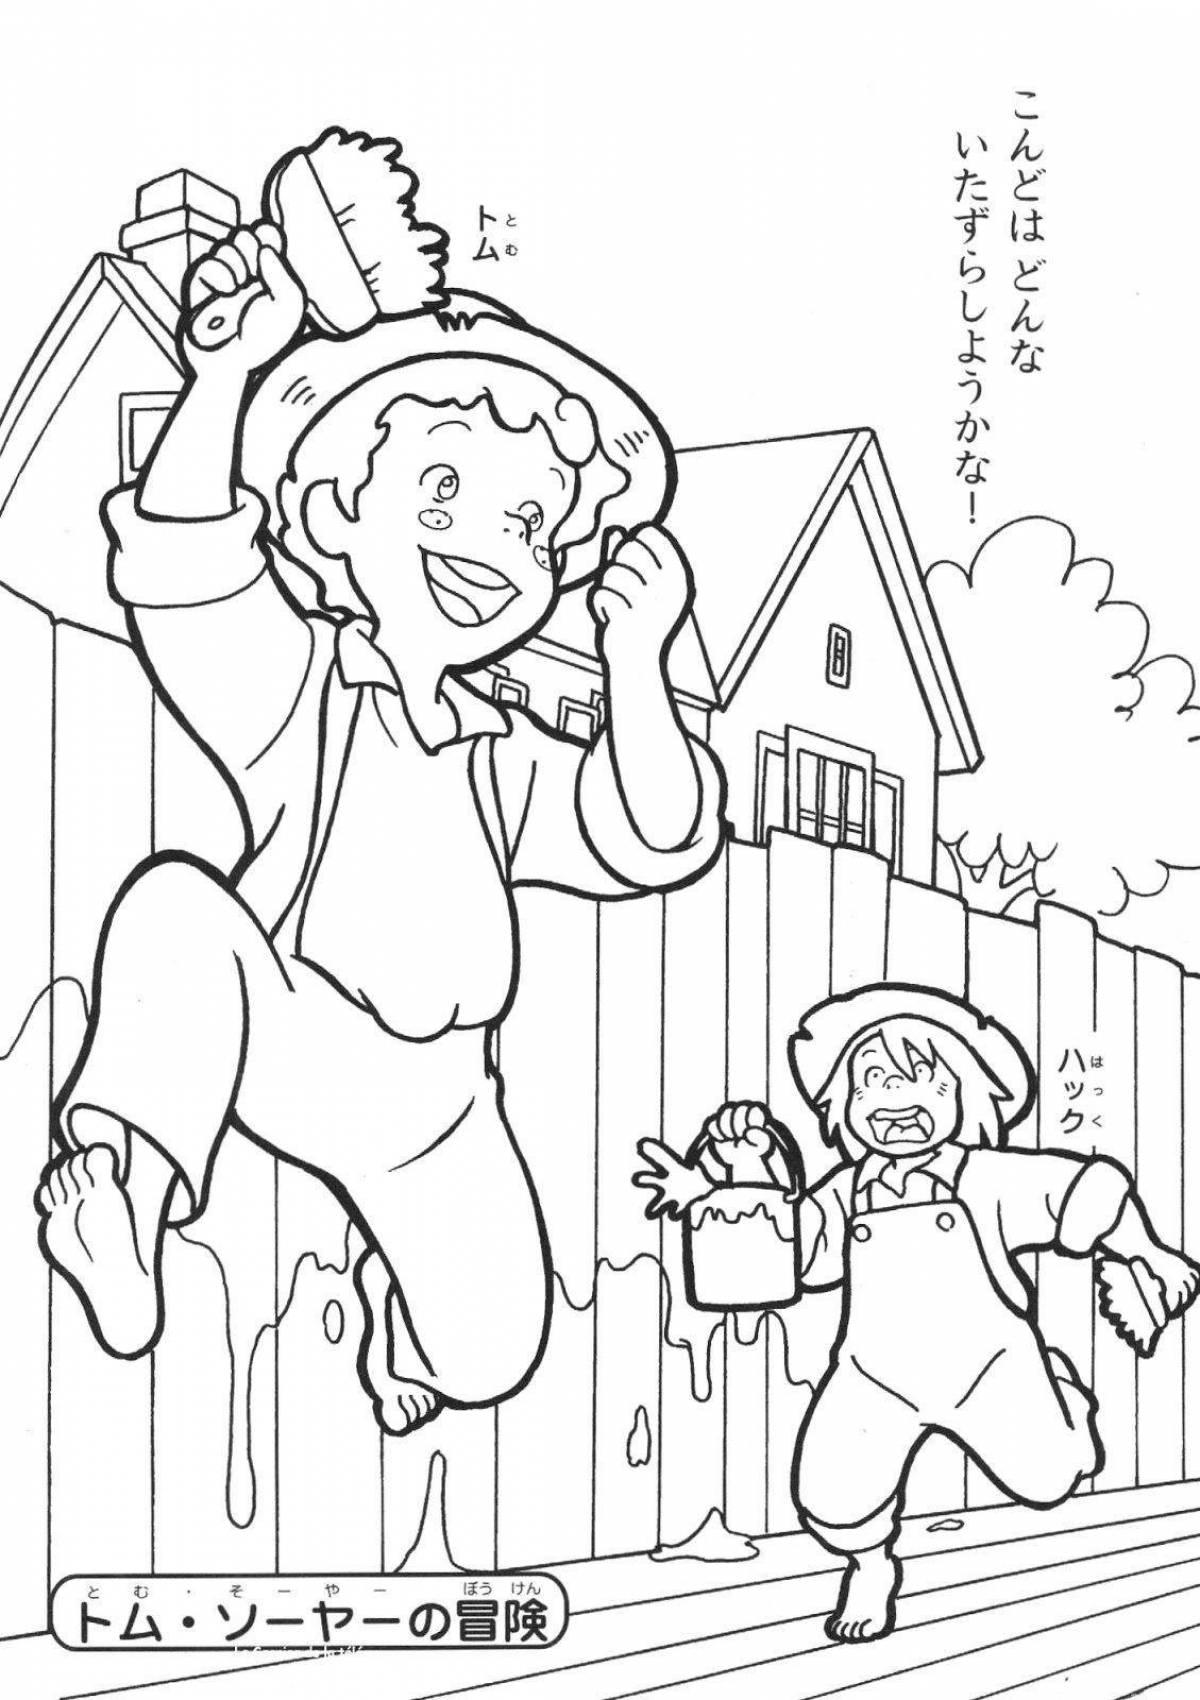 Photo Tom sawyer coloring book